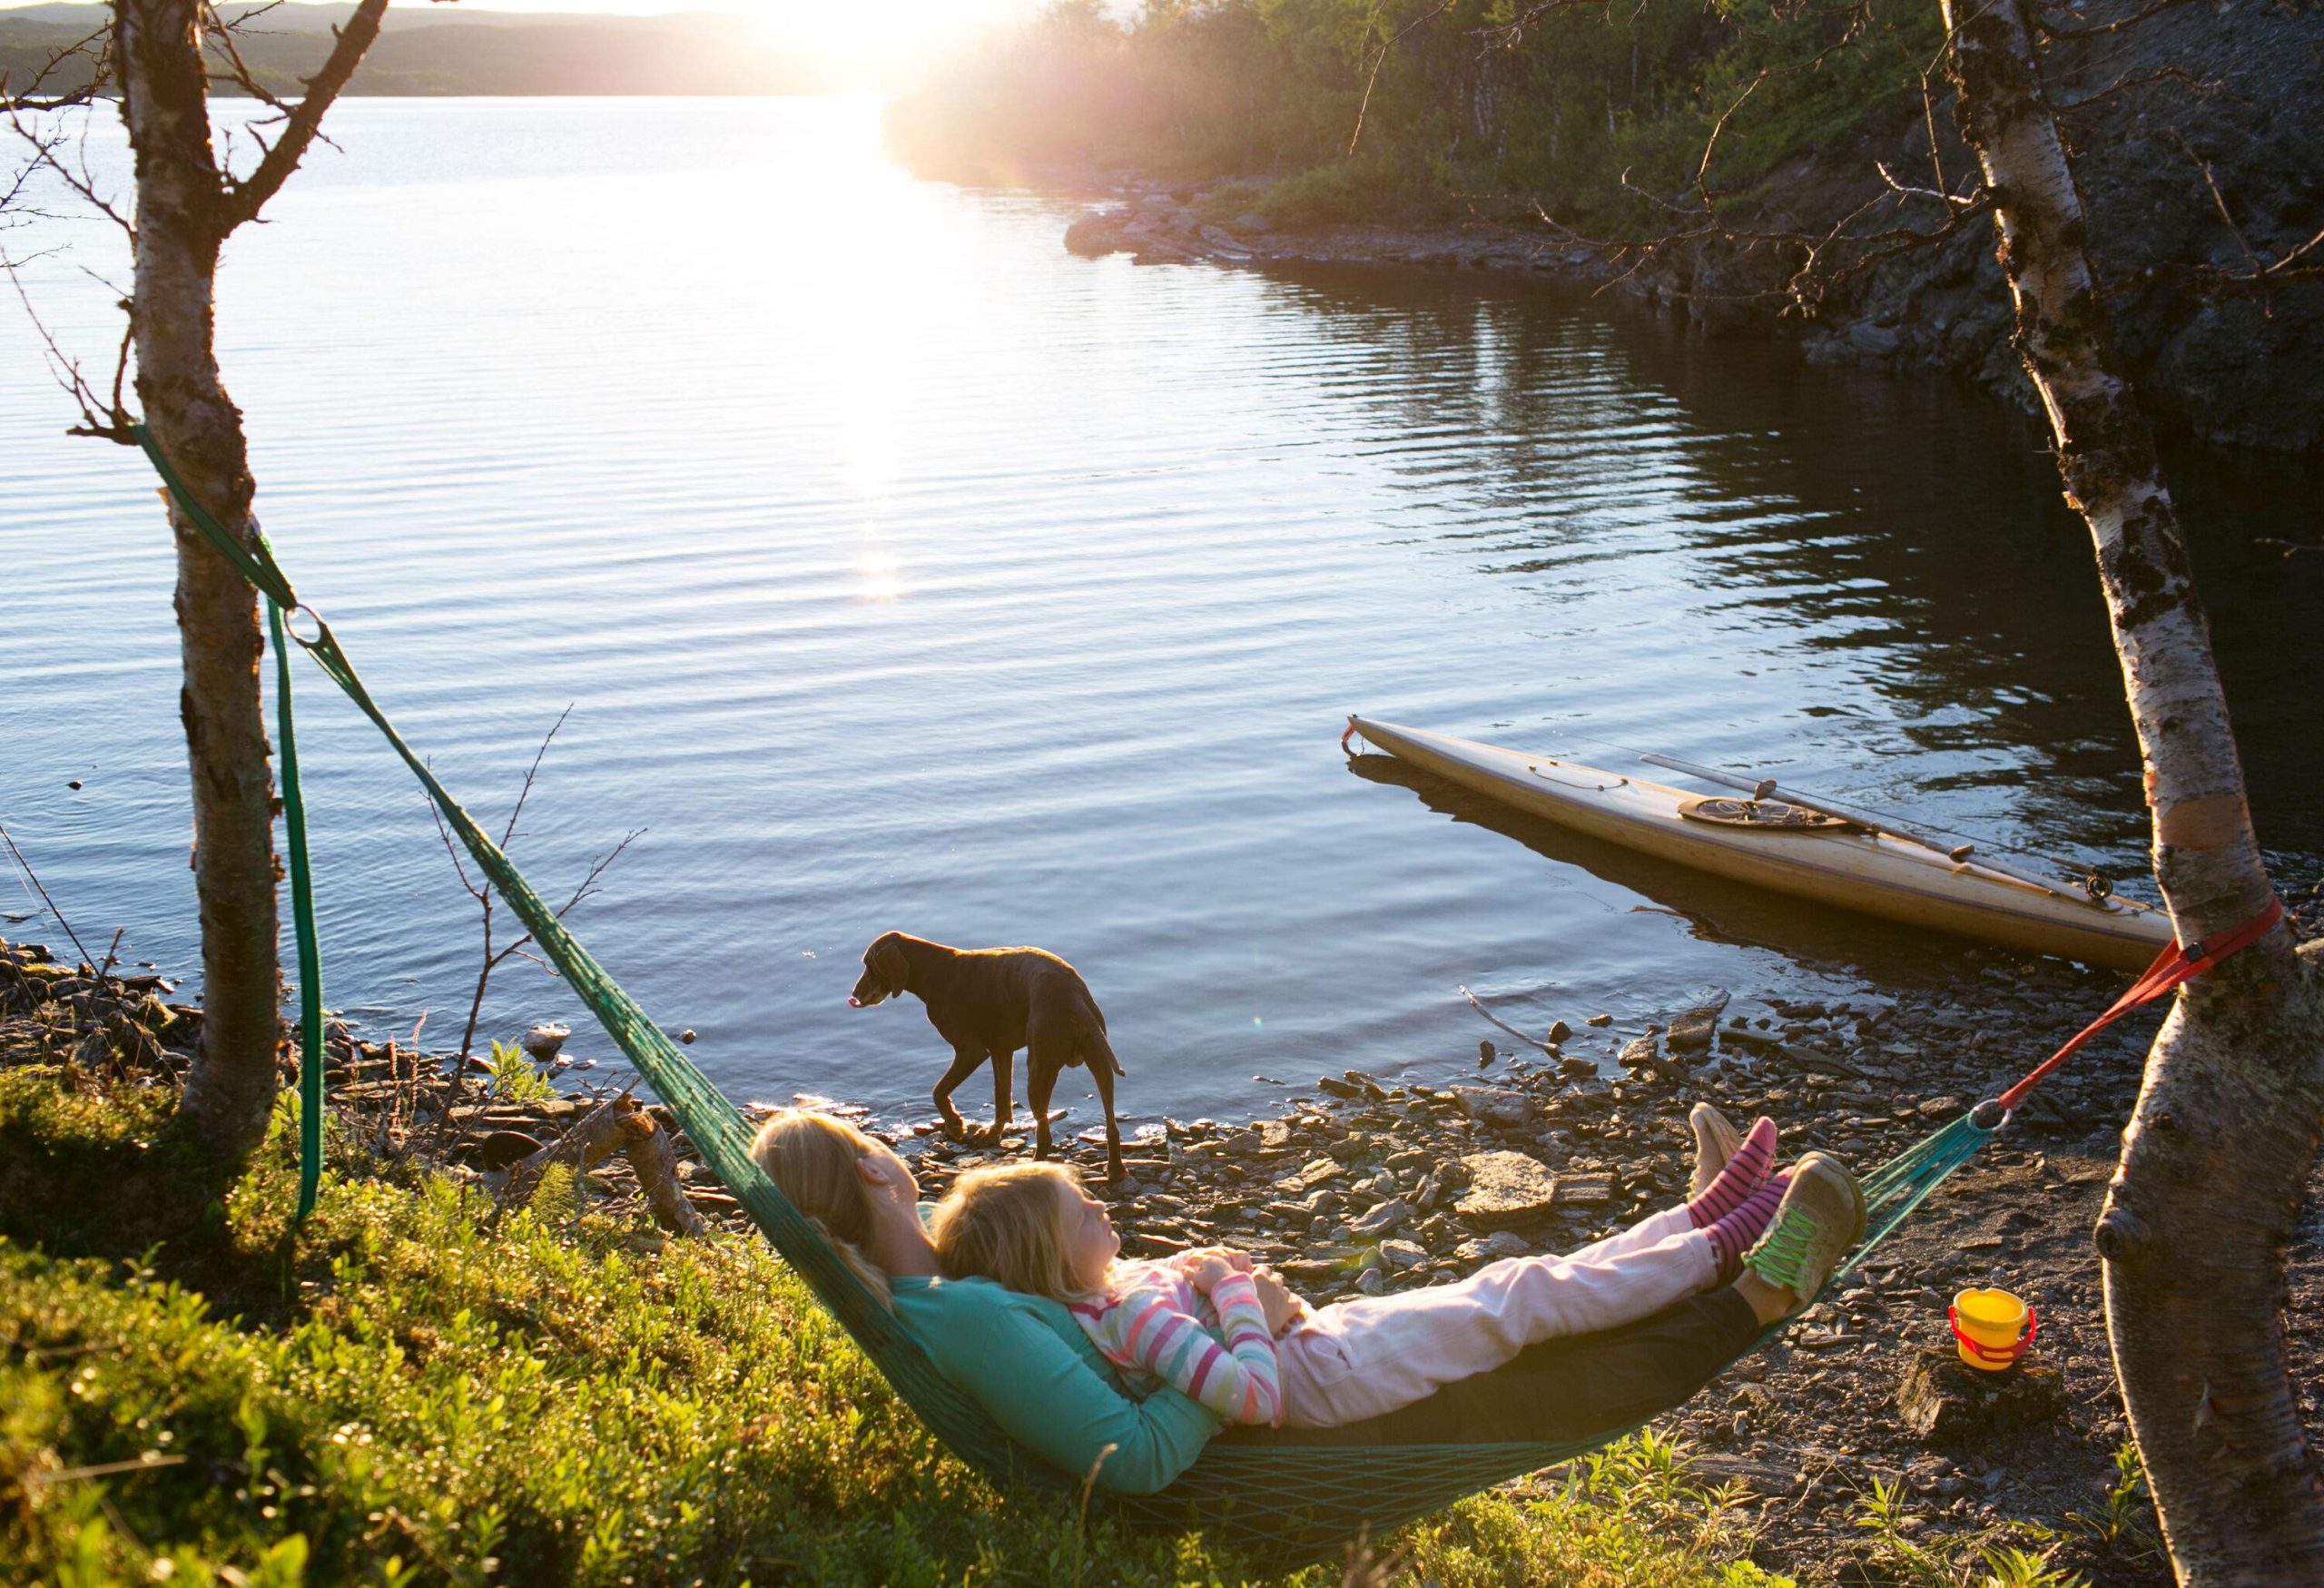 A mother and daughter are on a hammock with their dog by the lake as they enjoy the sunset.